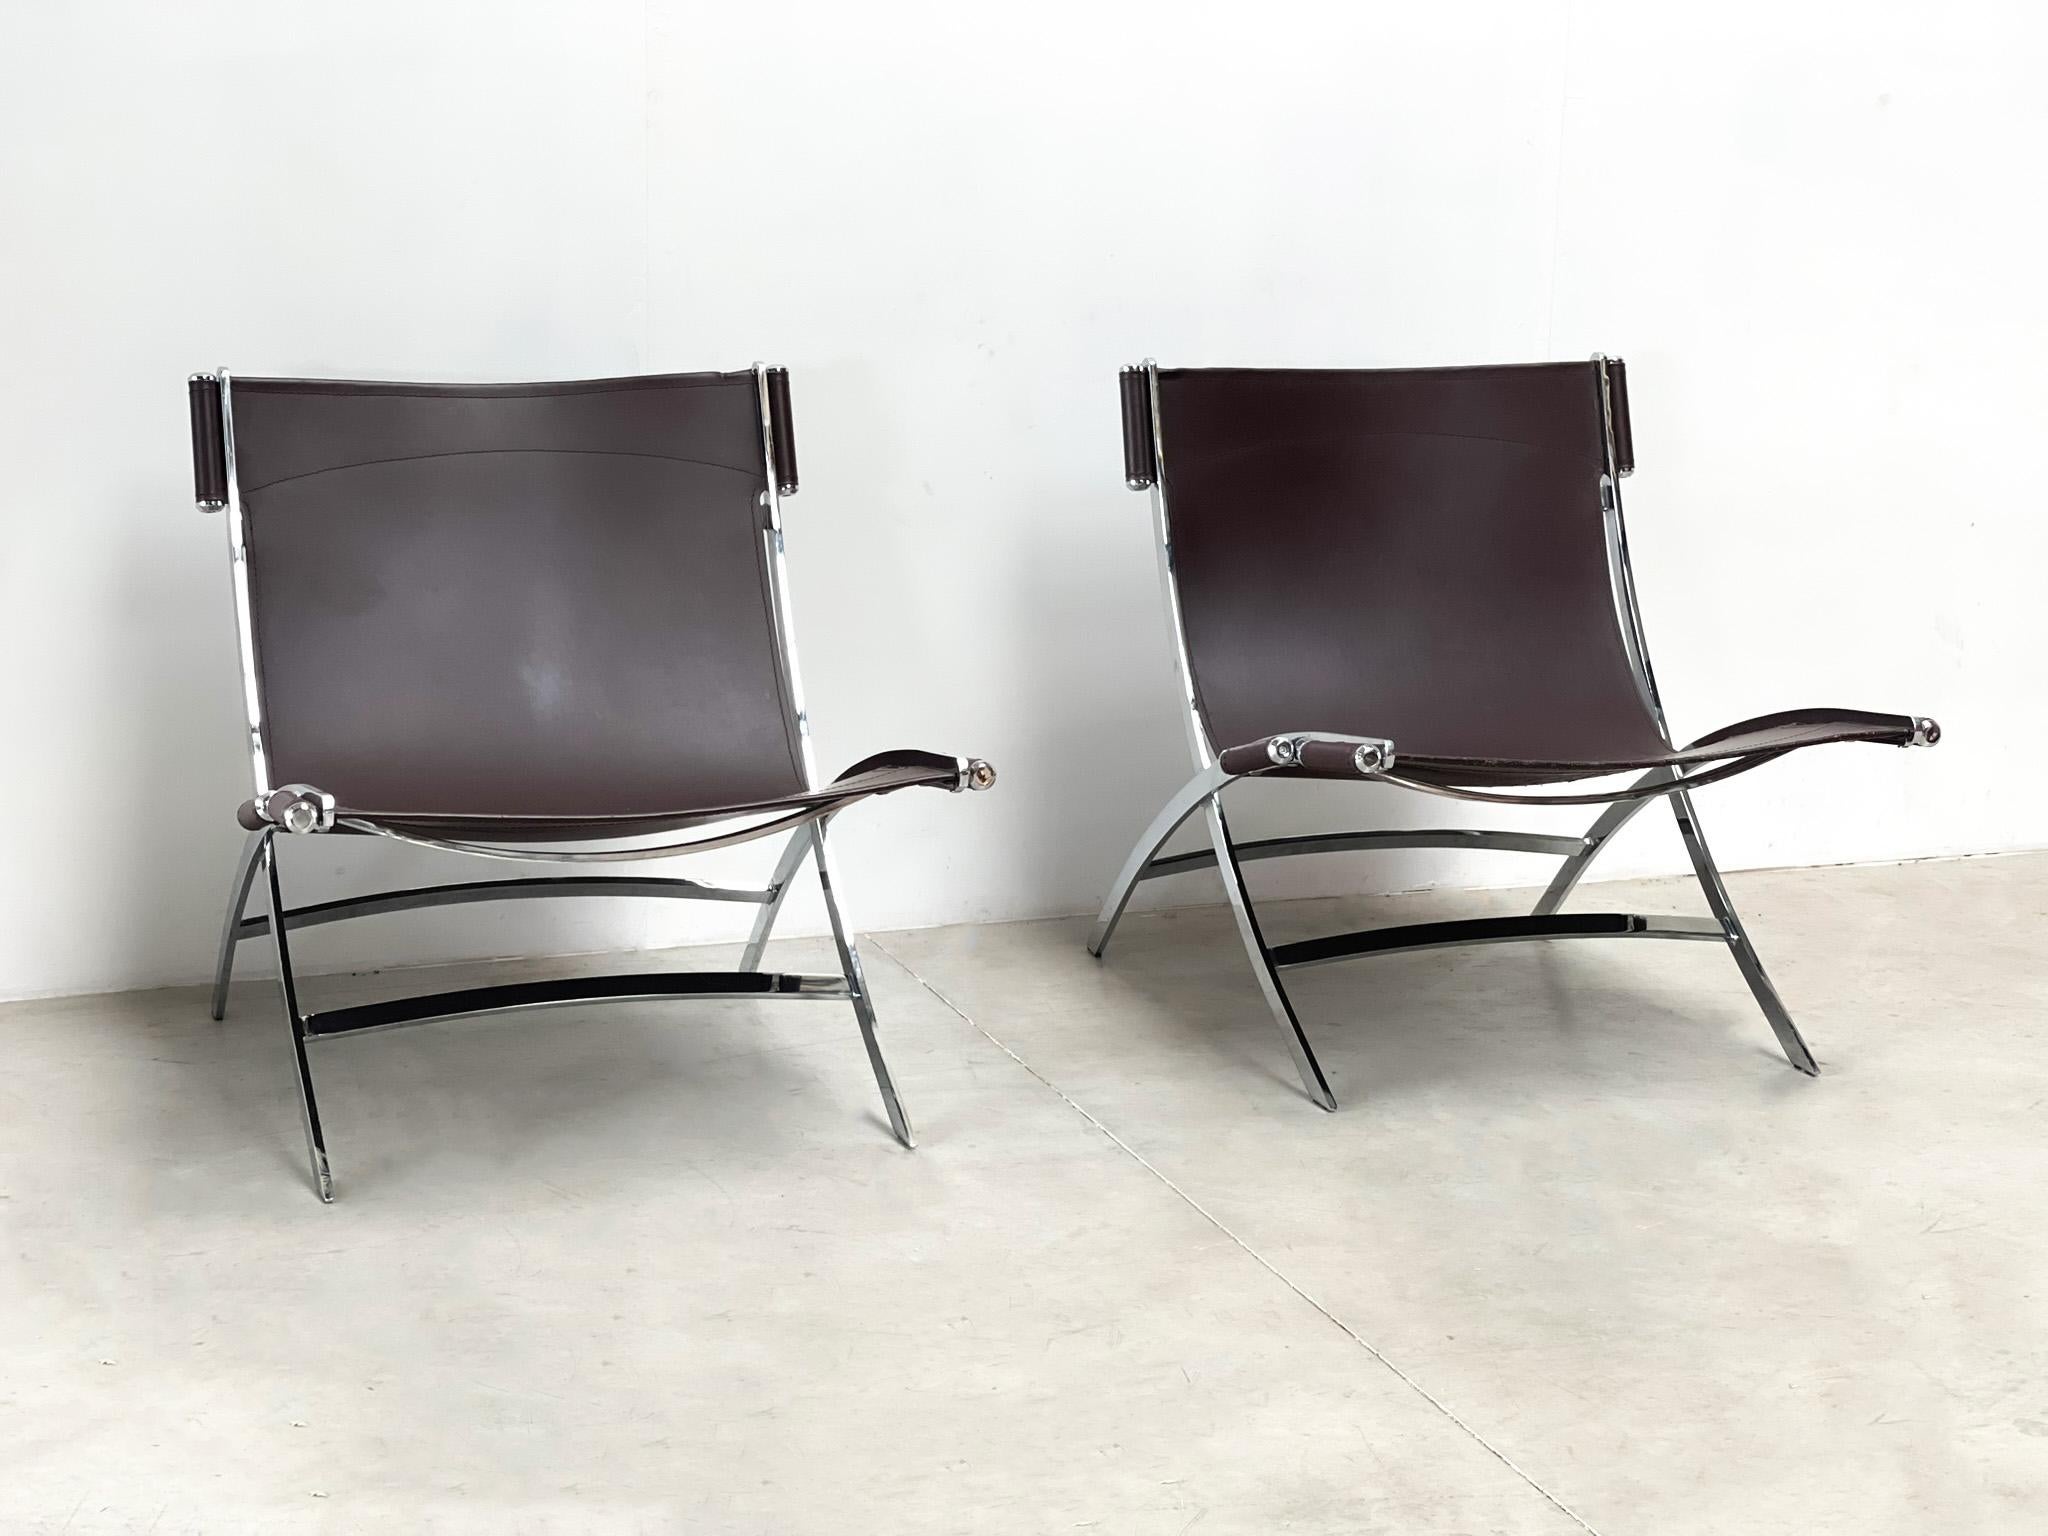 those looking for 2 lounge chairs with a luxurious feel have found them. These chairs from the 80s were made in Italy. Antonio Citterio designed these chairs for well-known manufacturer. Flexform Italia. The chairs have a very nice and quality